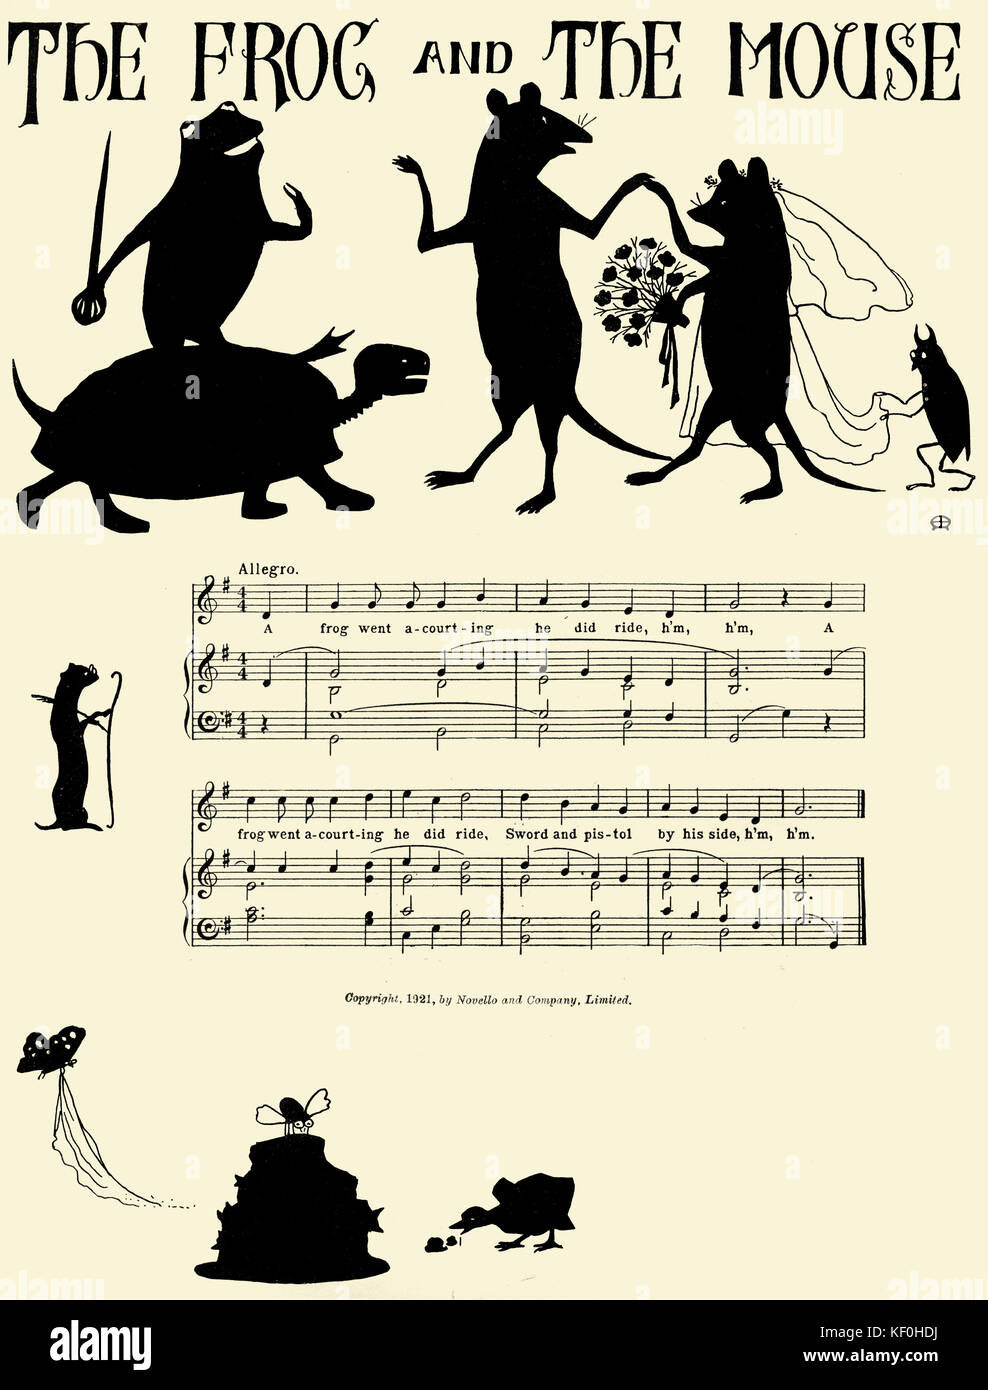 Cecil J. Sharp 's 'The Frog and the Mouse' from 'Nursery Songs from the Appalachian Mountains', illustrated by Esther Mackinnon (1885–1934). Score and silhouette illustrations.  Published by Novello & Co., London, 1921.CJS English editor and collector of folksongs, 22 November 1859 - 28 June 1924. Stock Photo